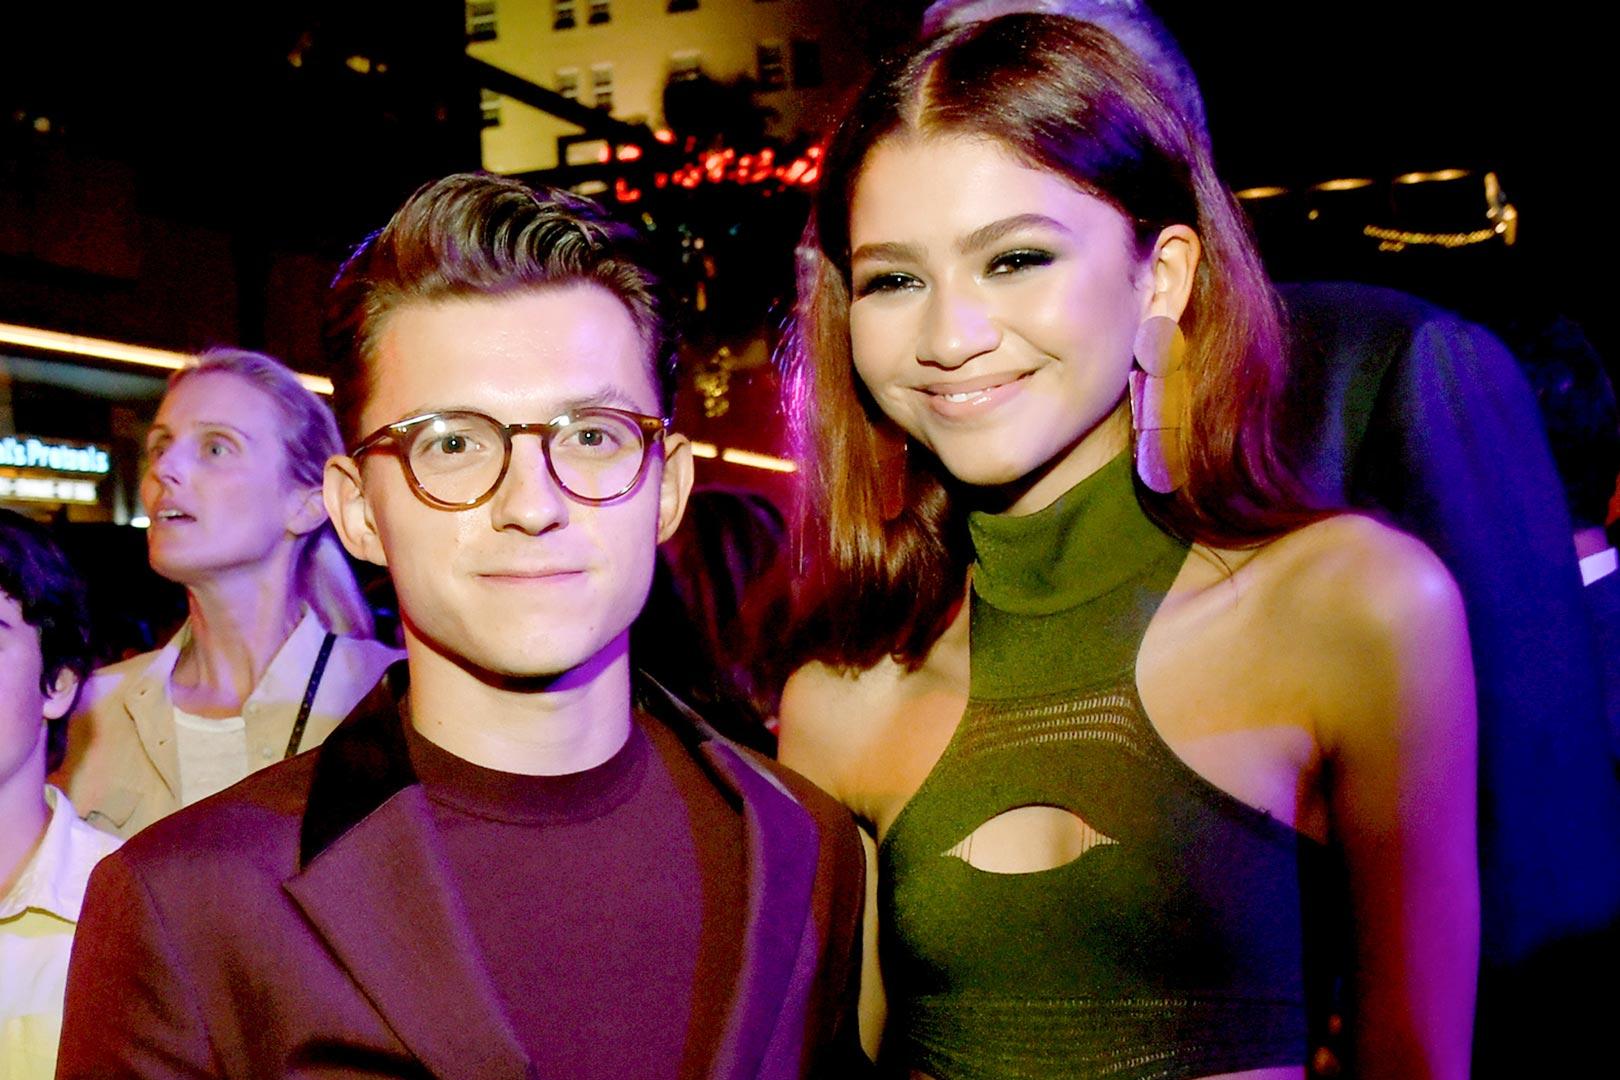 Spider Man: Far From Home's Zendaya, Tom Holland Are 'very